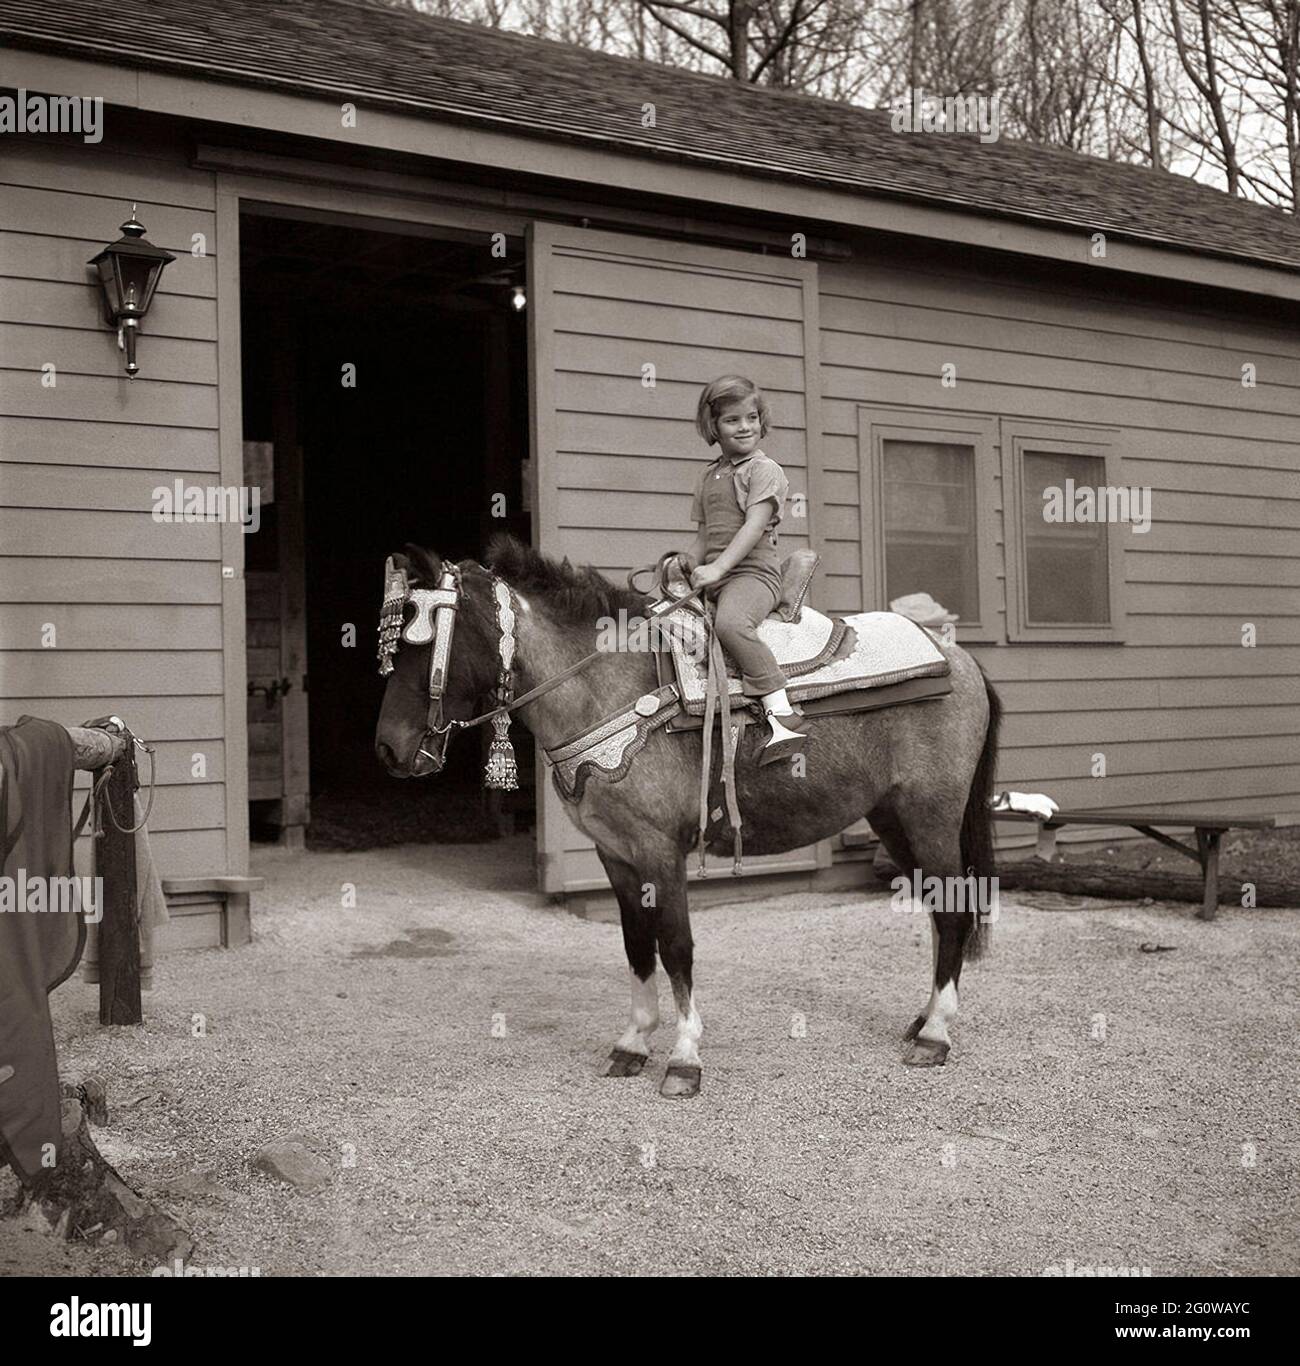 KN-C27677 31 March 1963 Weekend at Camp David. Caroline Kennedy poses  seated on her horse, "Macaroni", the saddle on Macaroni was a gift from  King Hassan II of Morroco. Camp David, Maryland.